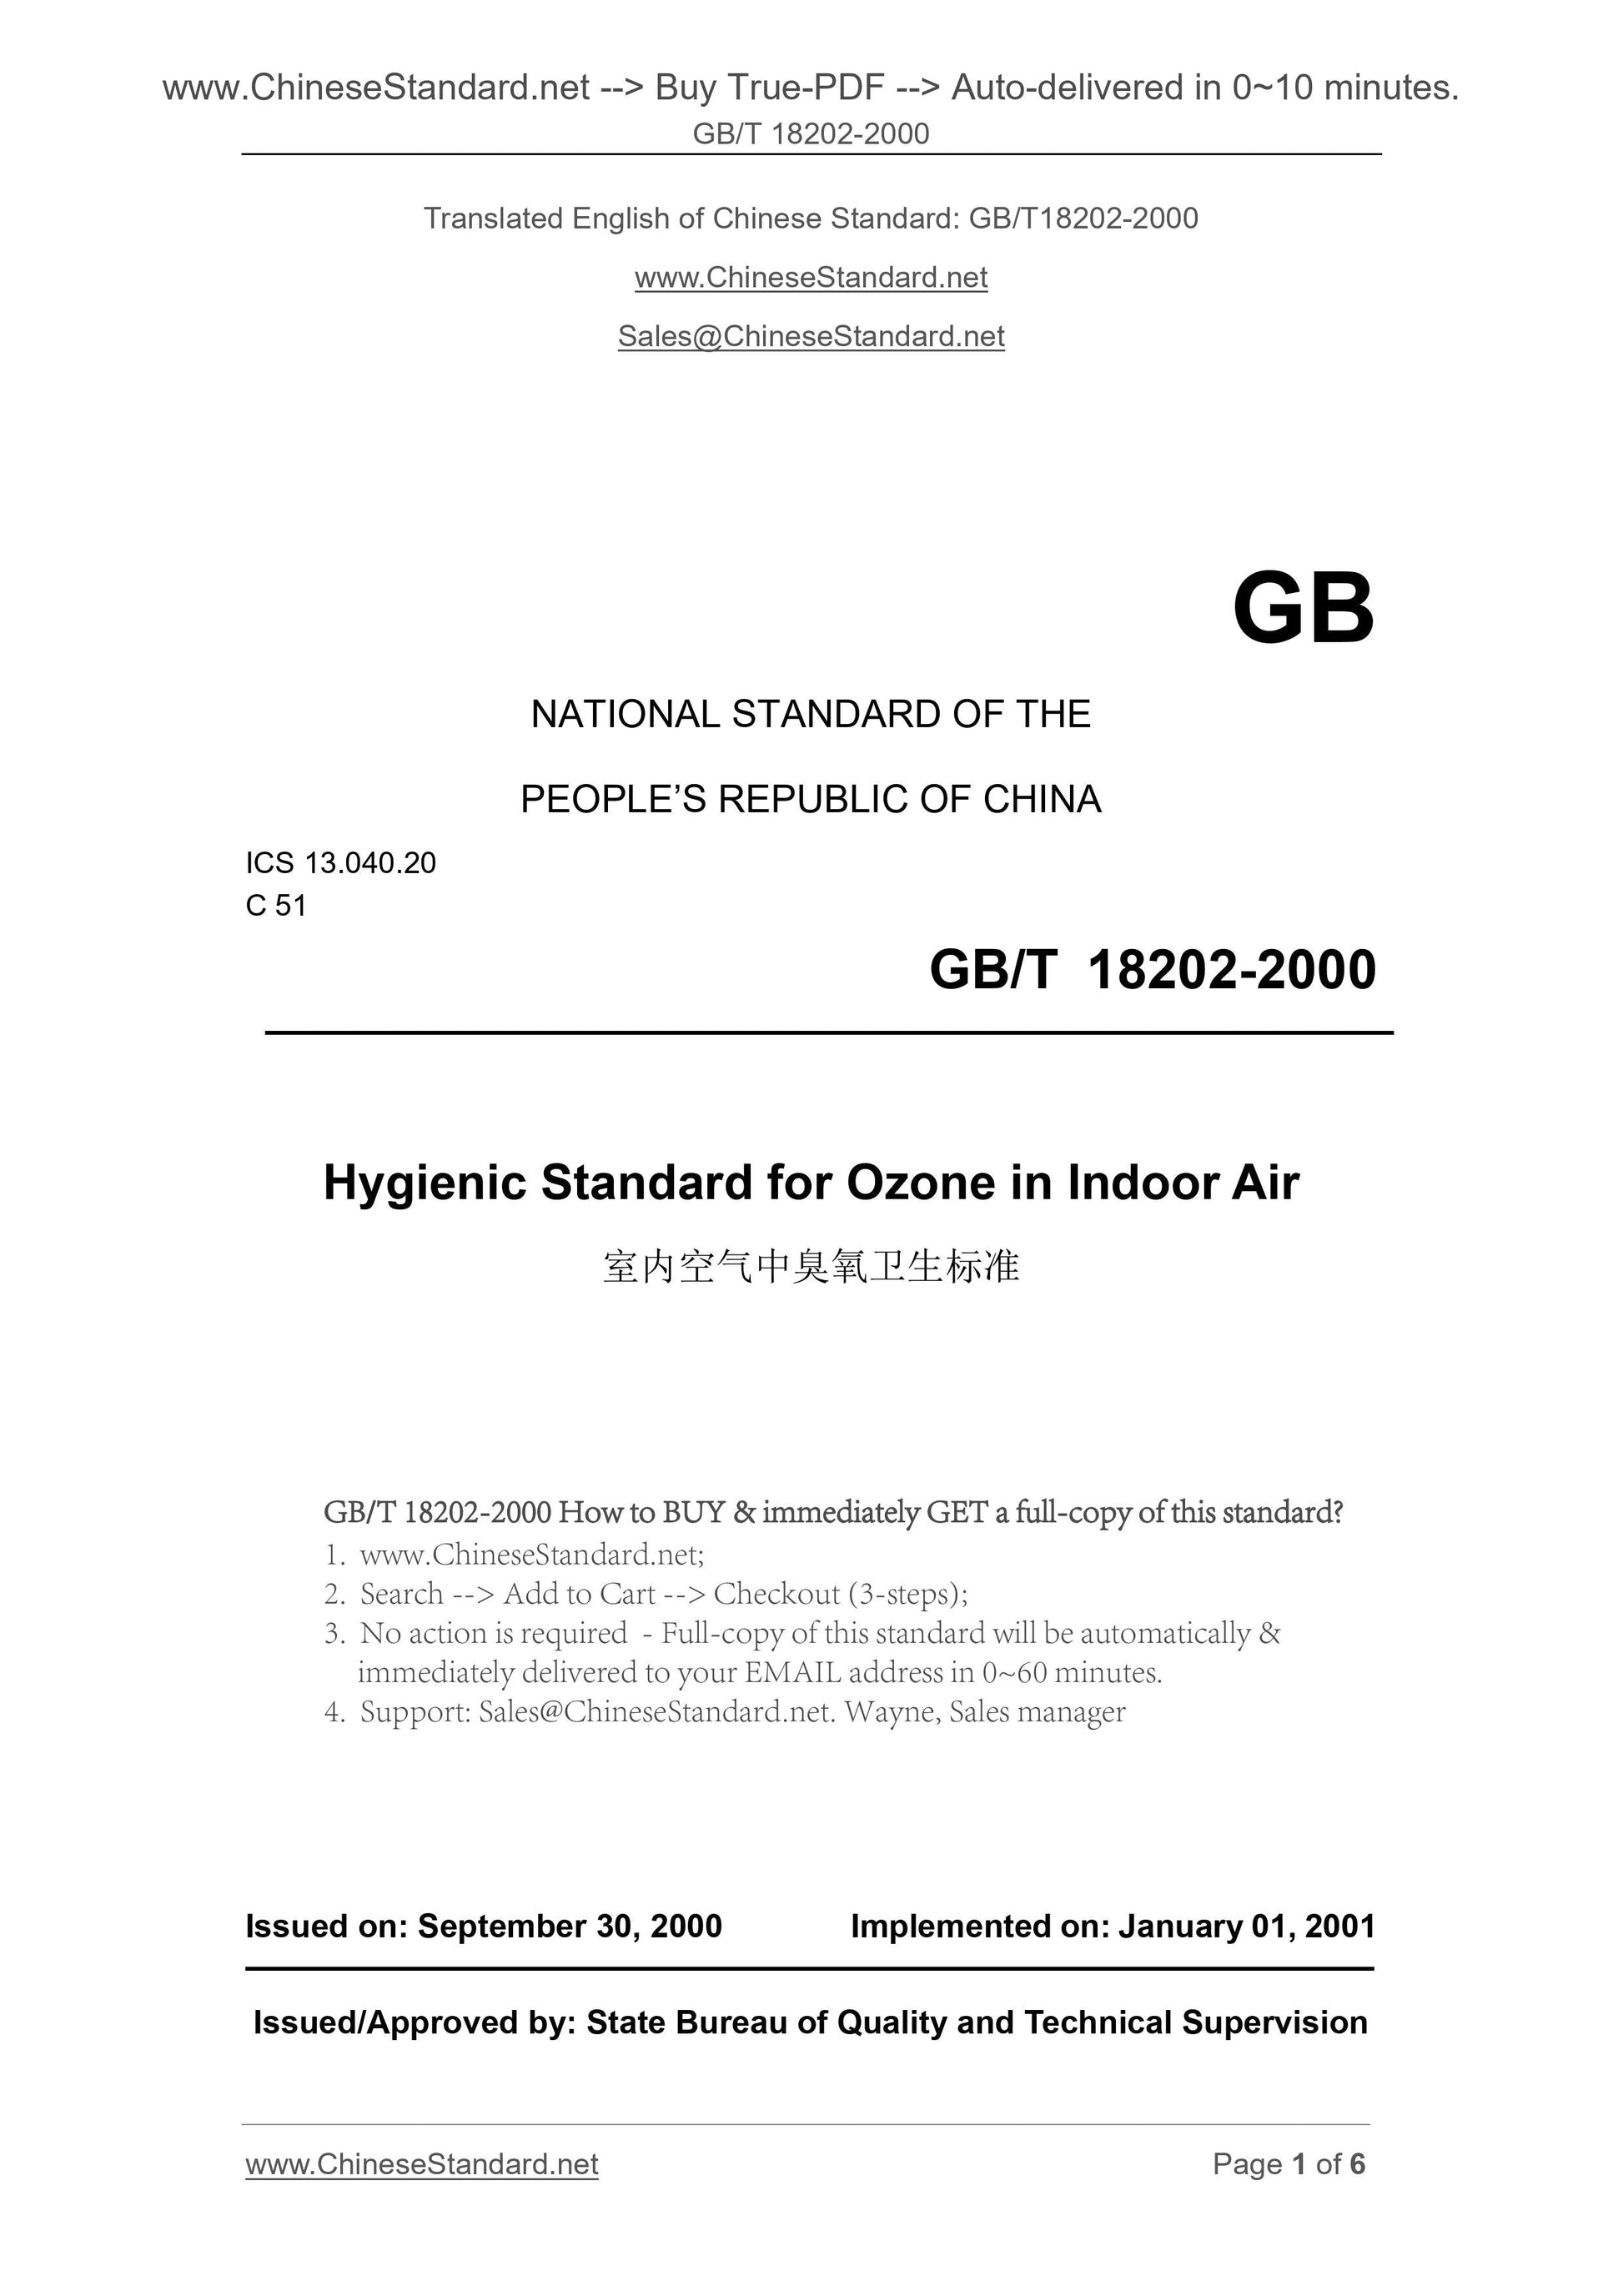 GB/T 18202-2000 Page 1